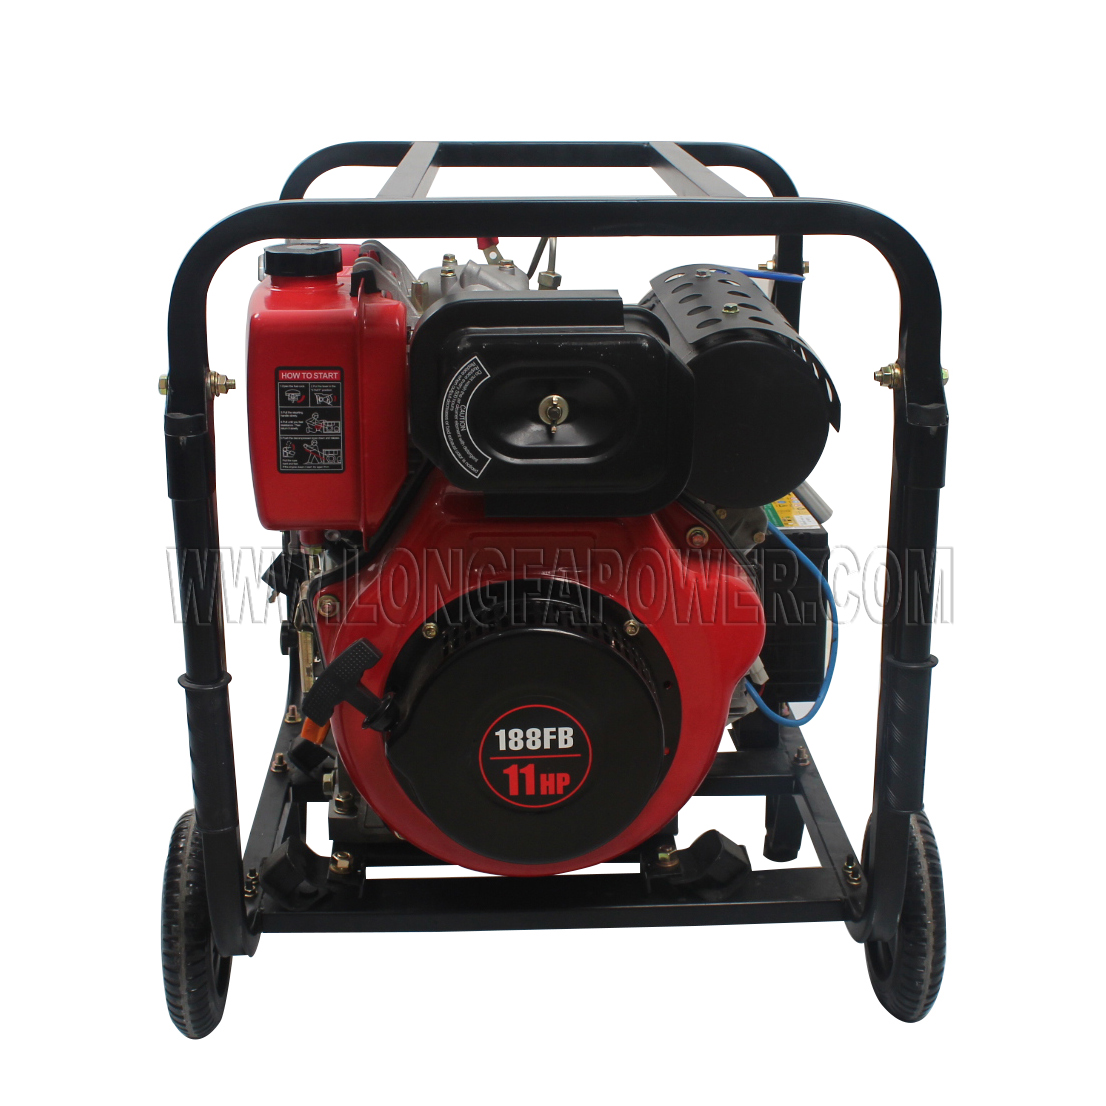 2 Inch 3 Inch 4 Inch High Pressure Cast Iron Diesel Water Pump for Fire Fighting